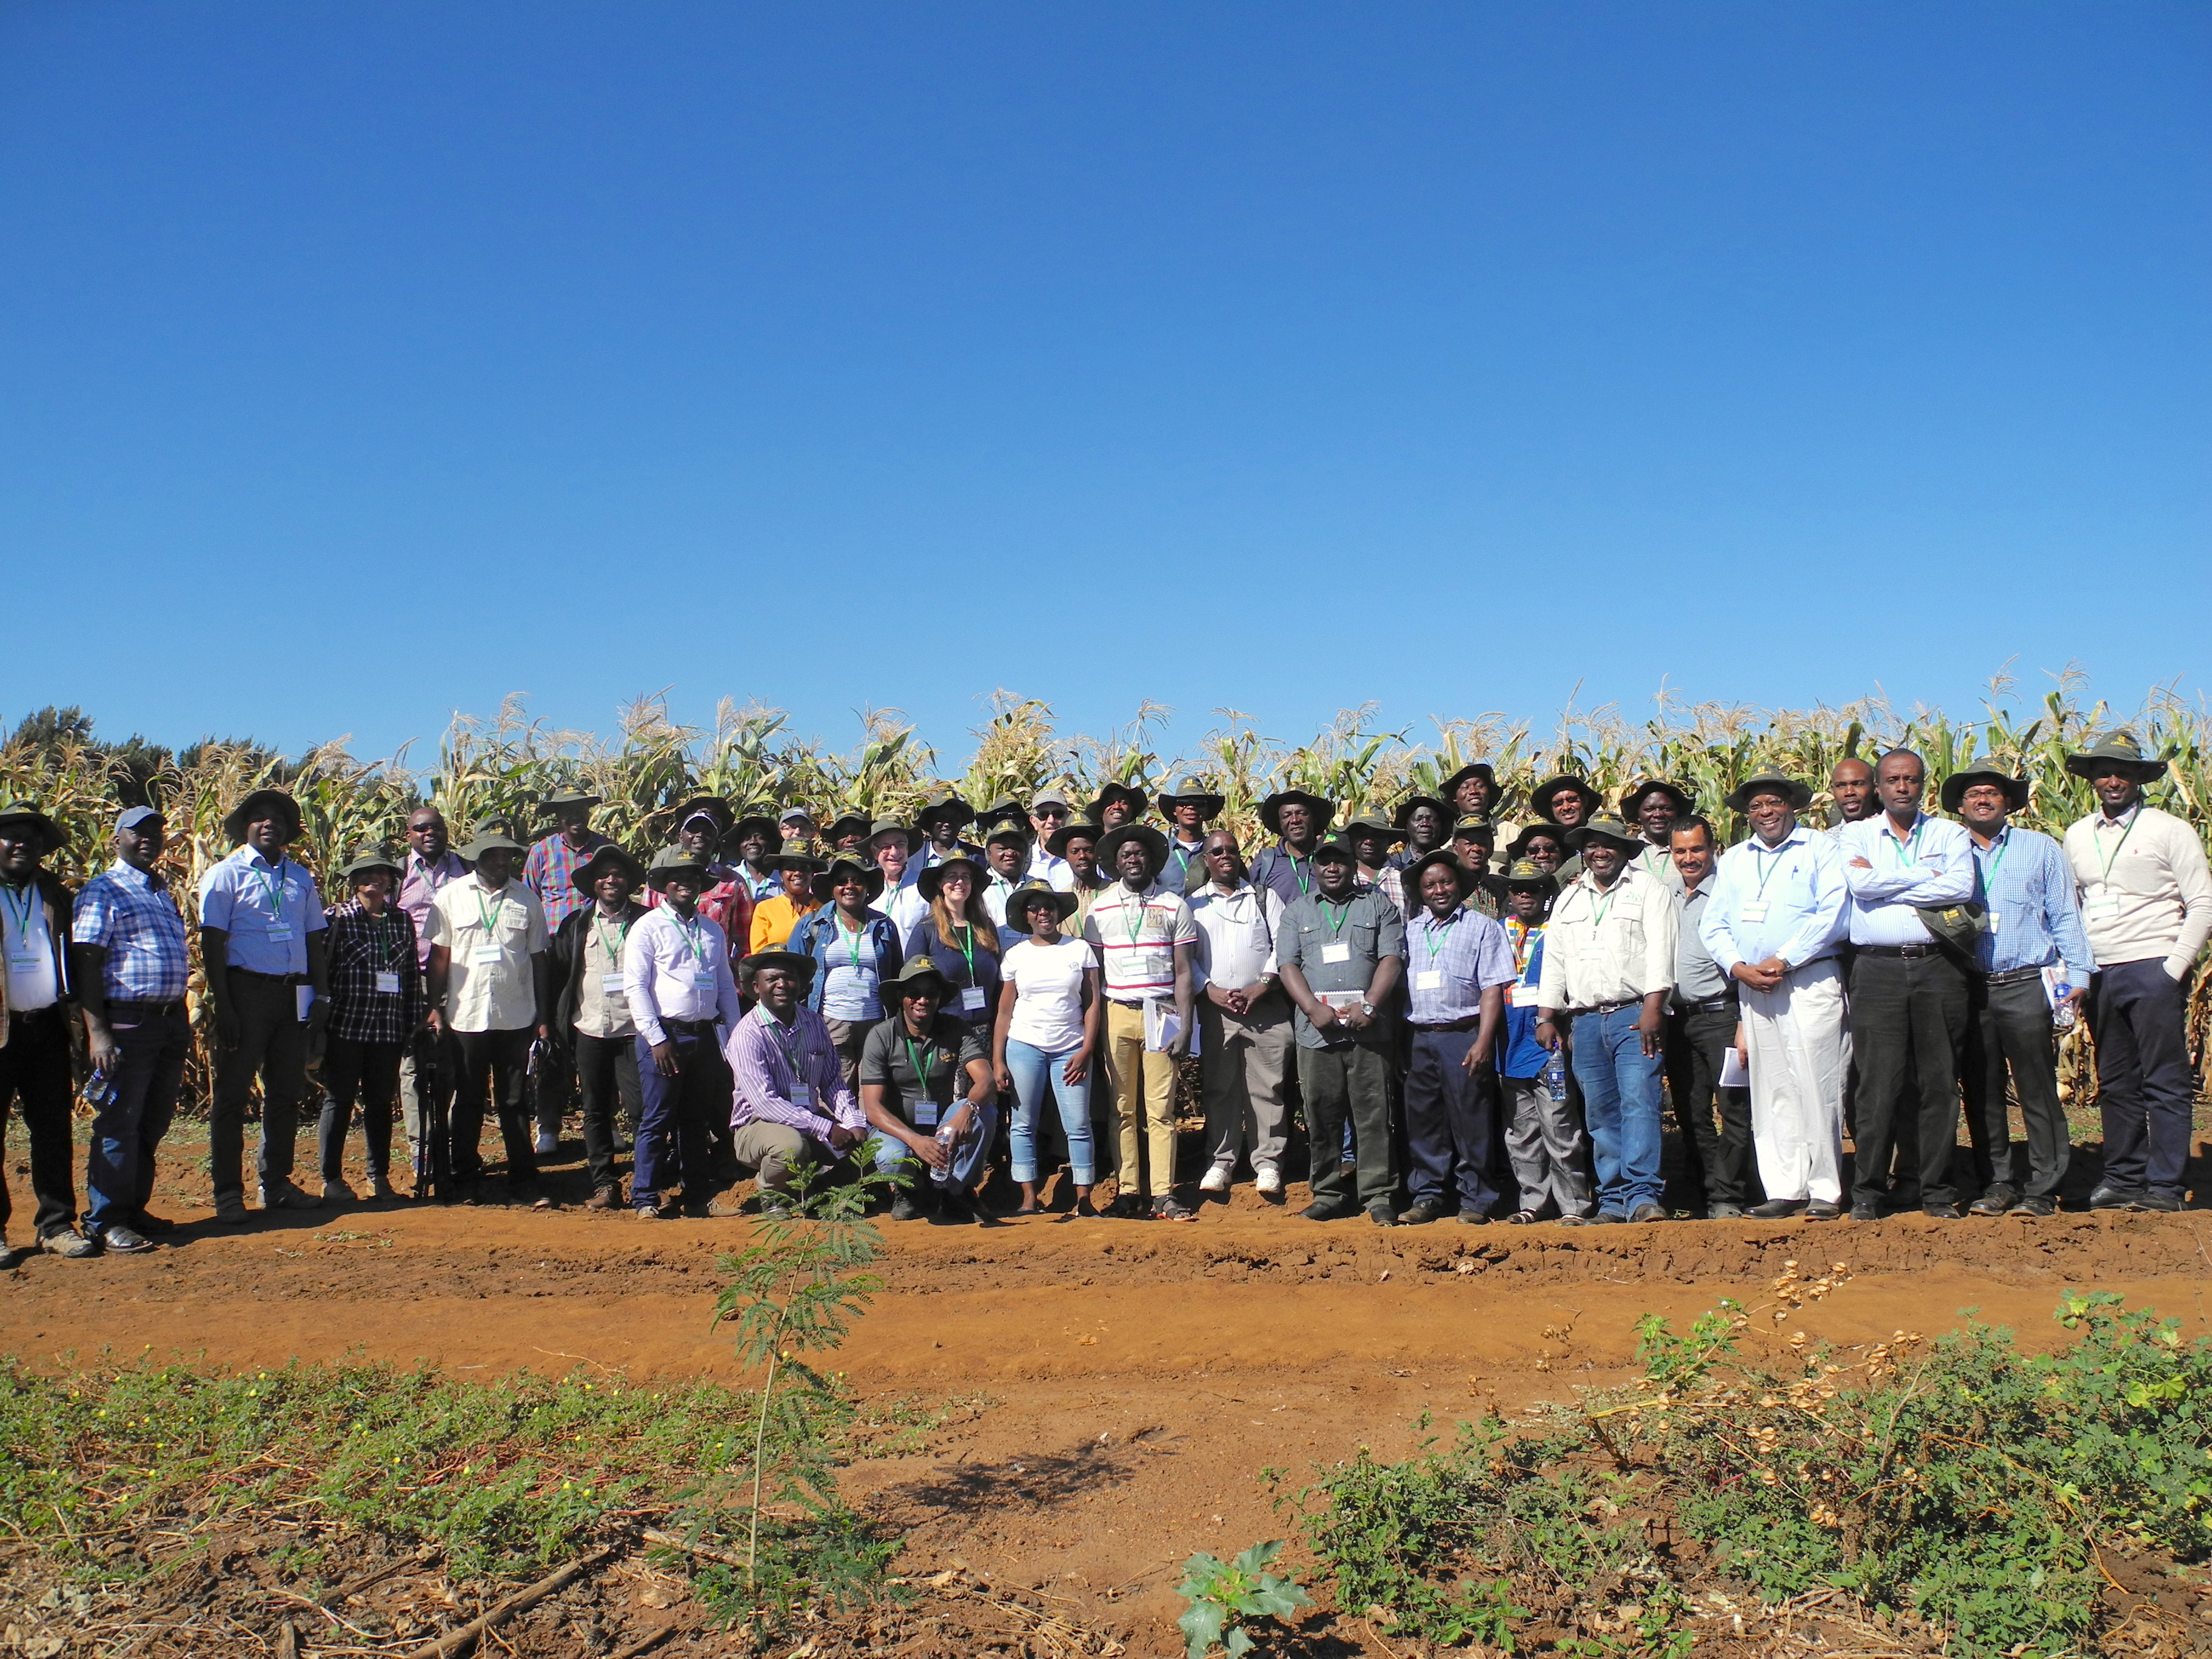 STMA meeting participants pose for a group photo during the field visit to QualiBasic Seed. (Photo: Jennifer Johnson/CIMMYT)